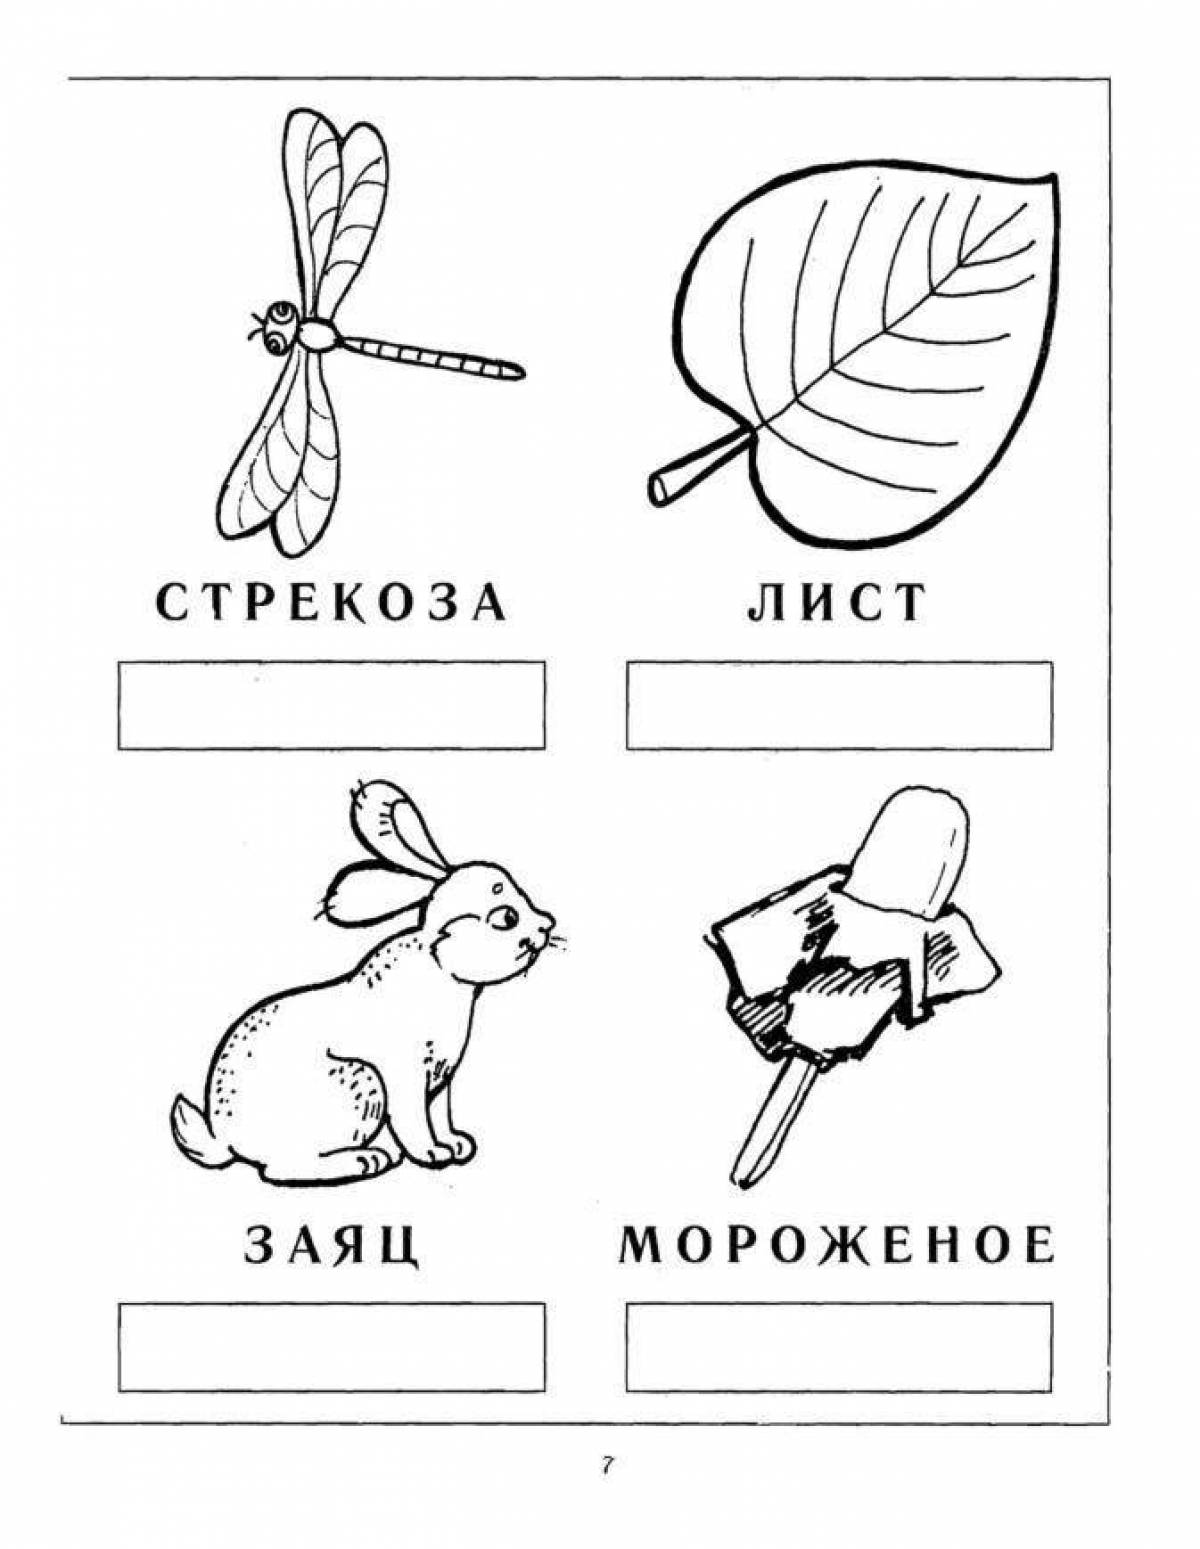 Funny coloring in Russian 1st grade